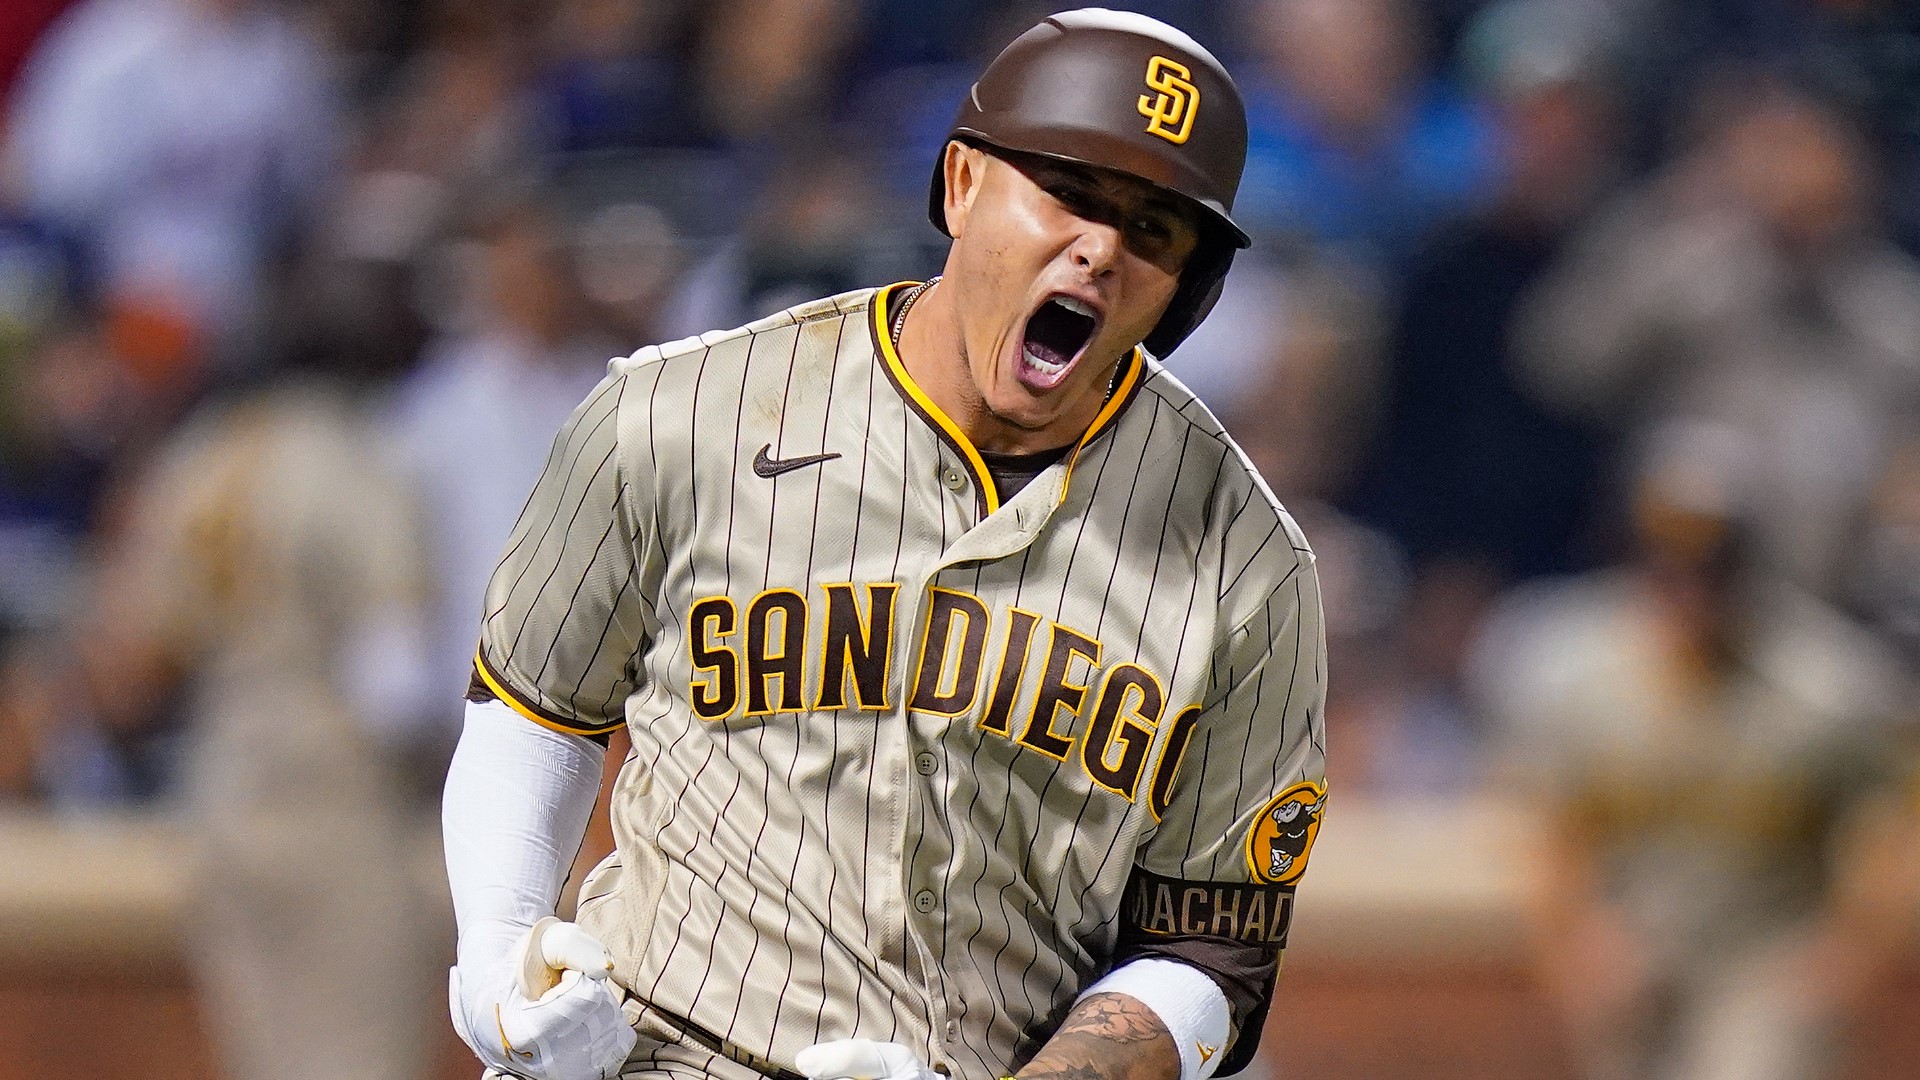 The $350 million deal will keep Machado in a San Diego Padres uniform until he is 41 years old.